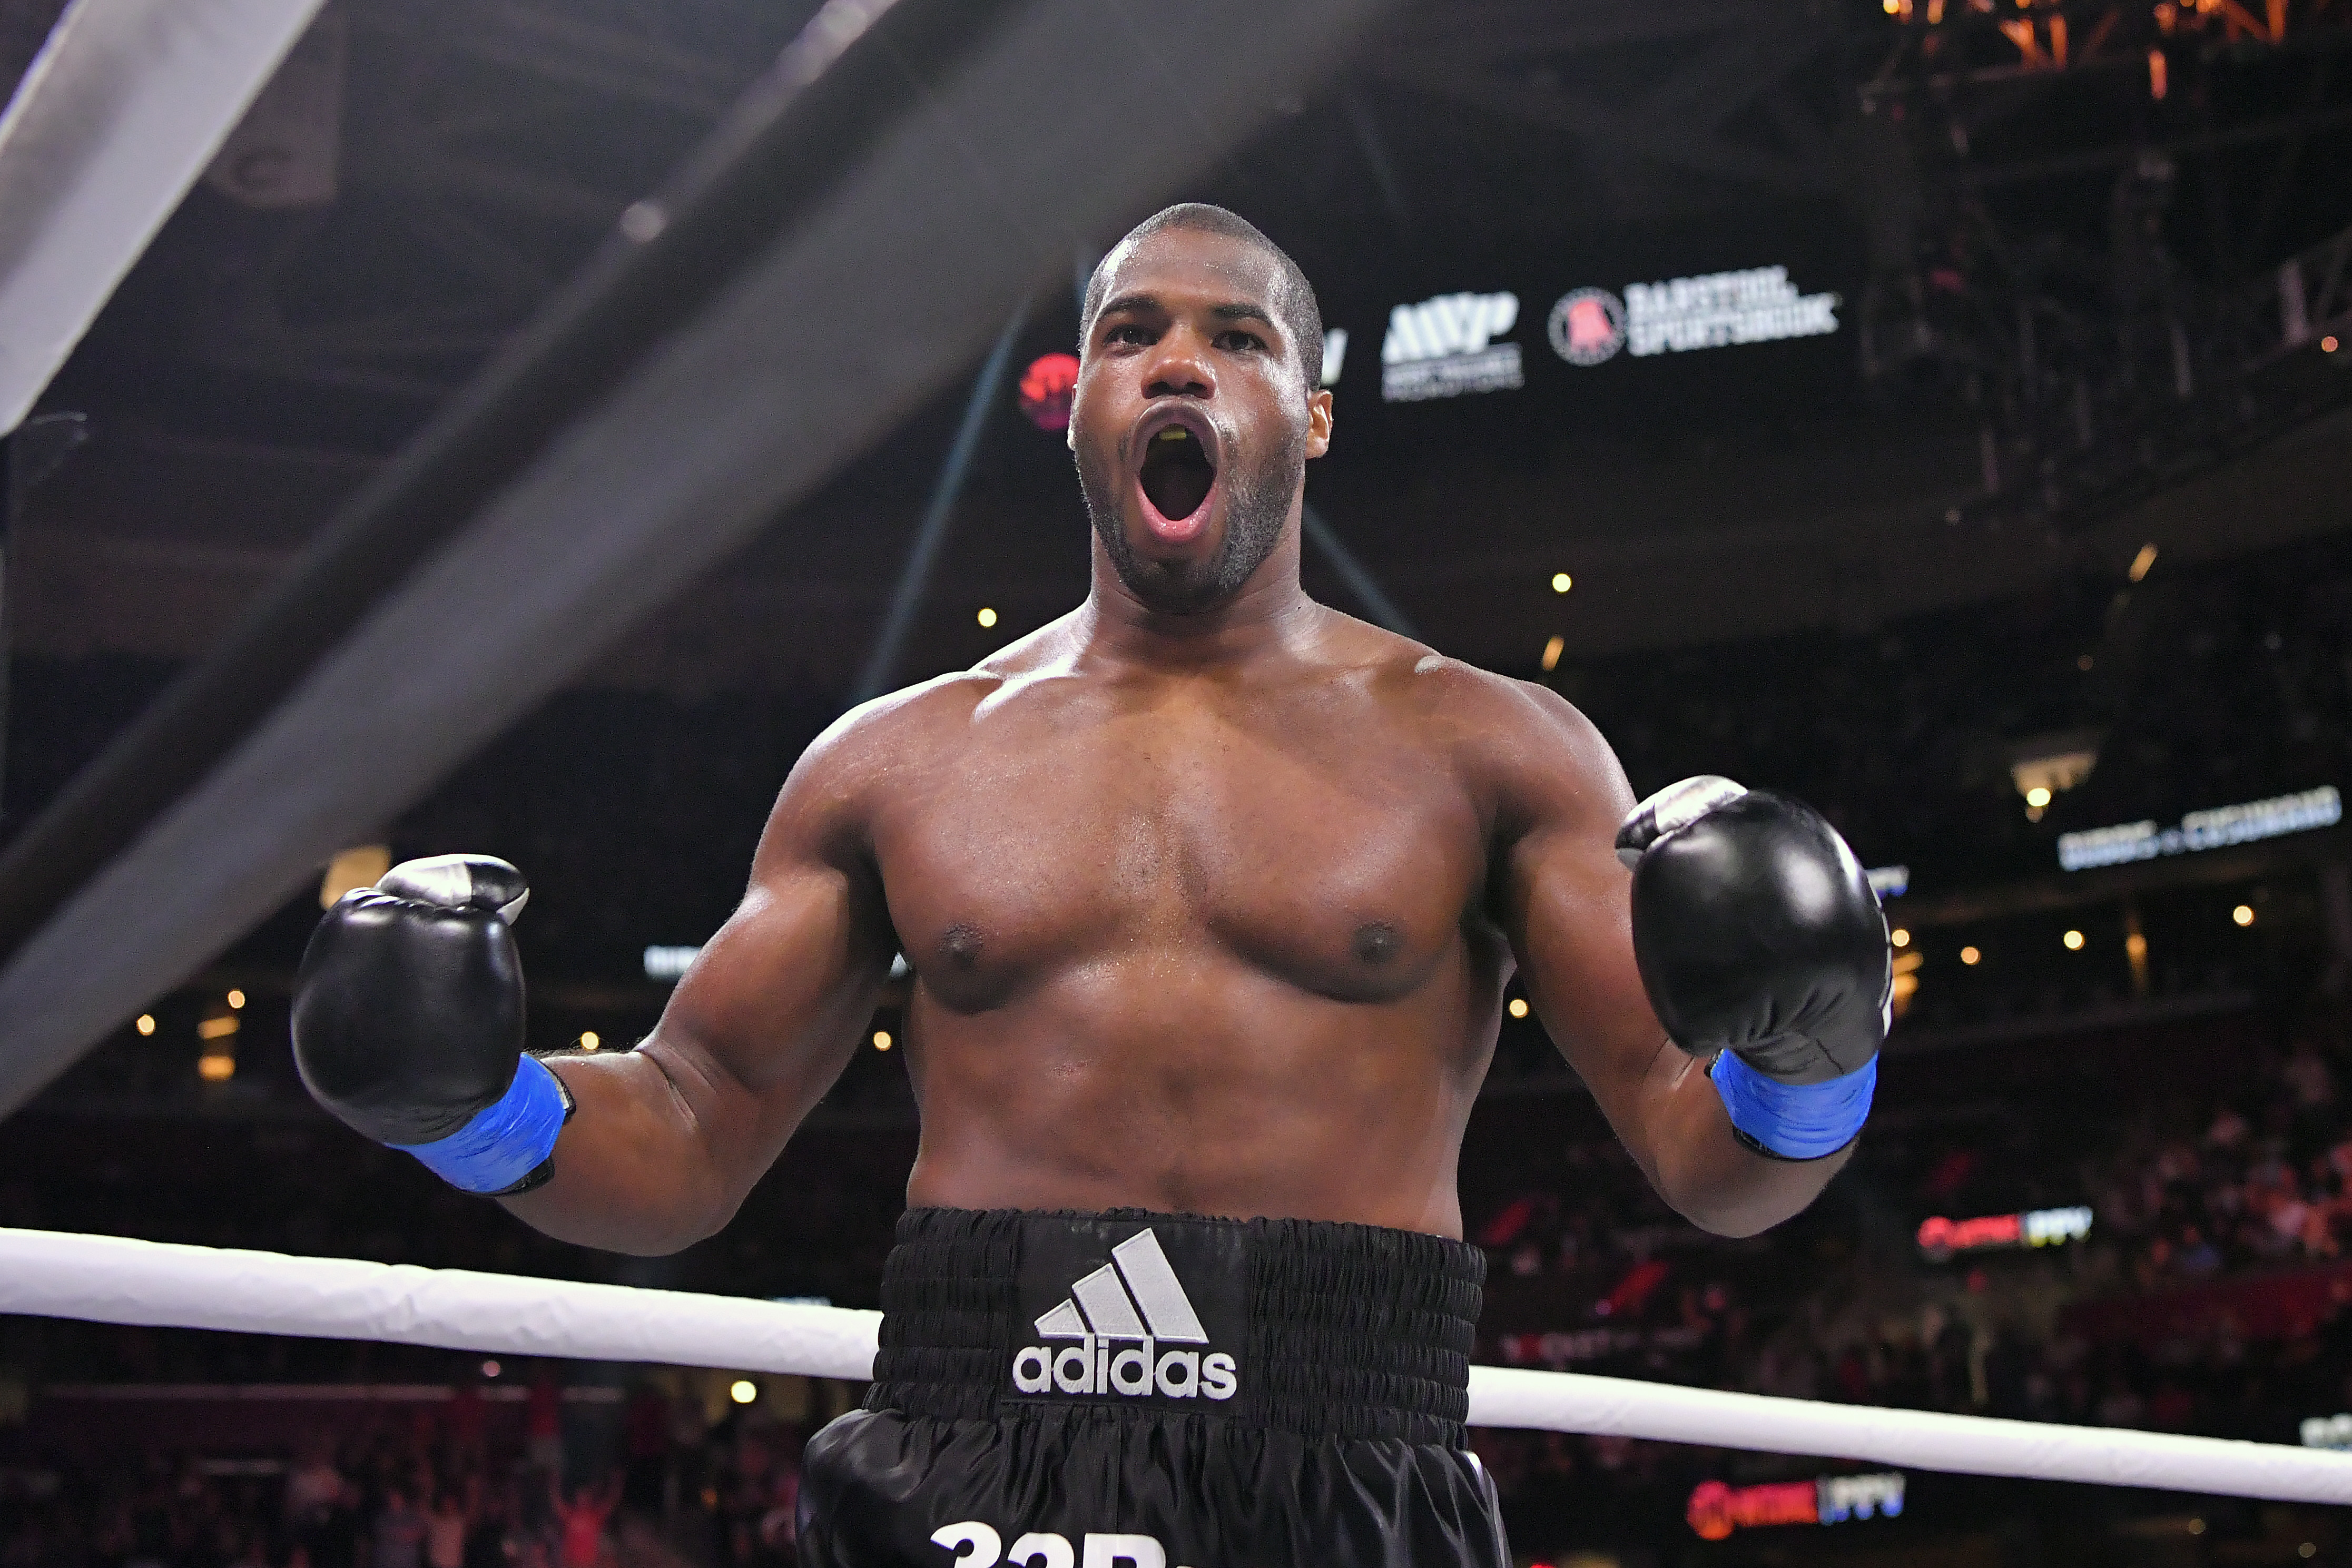 &nbsp;Daniel Dubois celebrates after knocking out Juan Carlos Rubio in their heavyweight bout during a Showtime pay-per-view event at Rocket Morgage Fieldhouse on August 29, 2021 in Cleveland, Ohio.